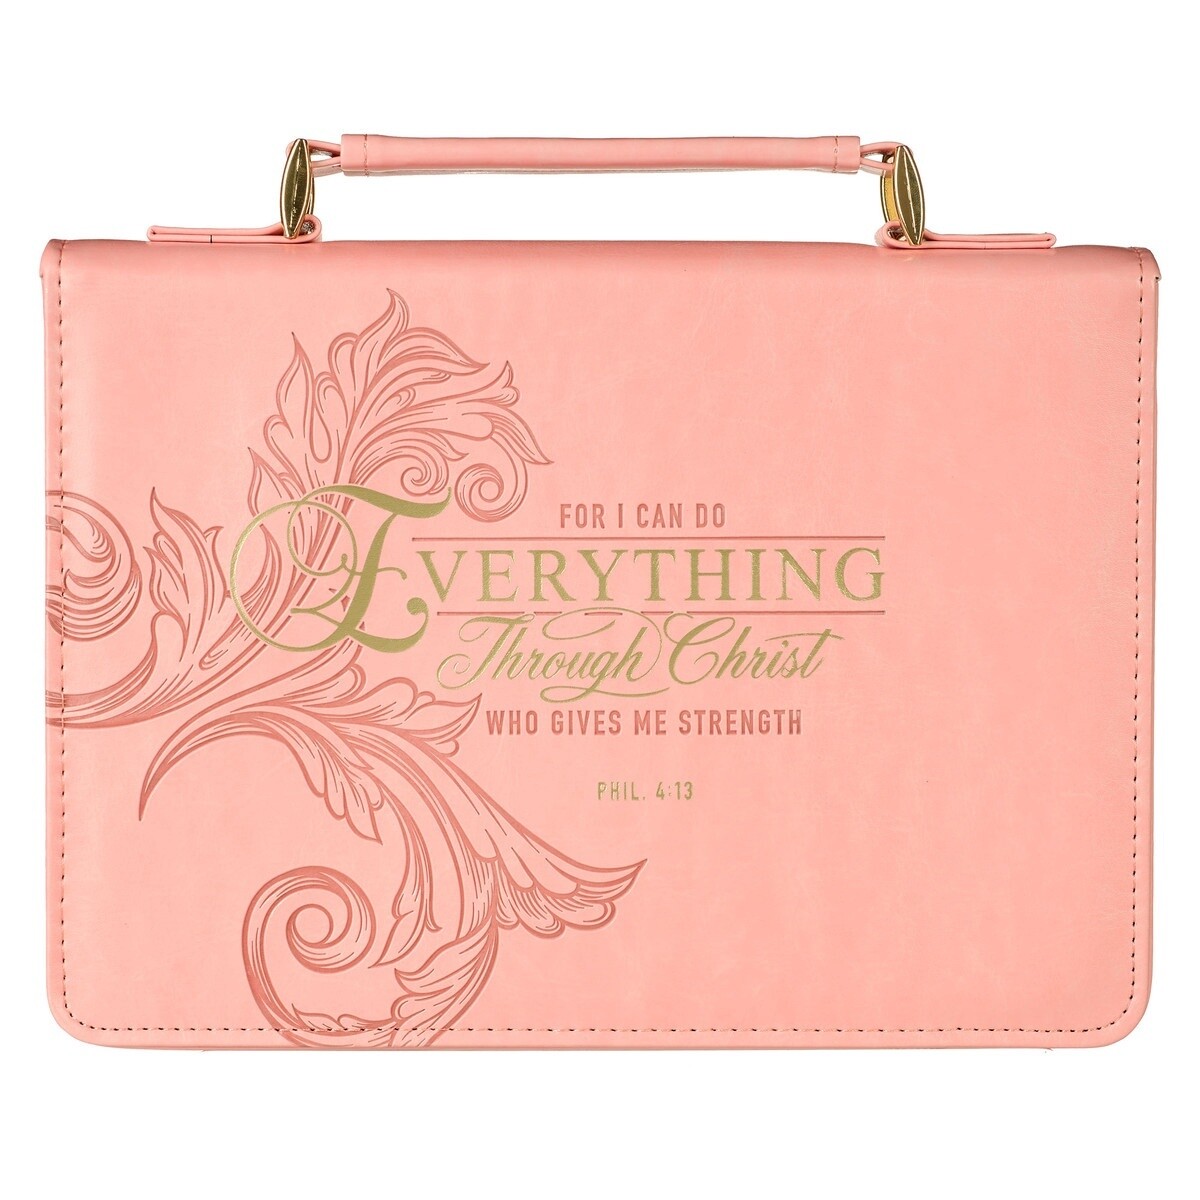 Philippians 4:13 Pink Bible Cover